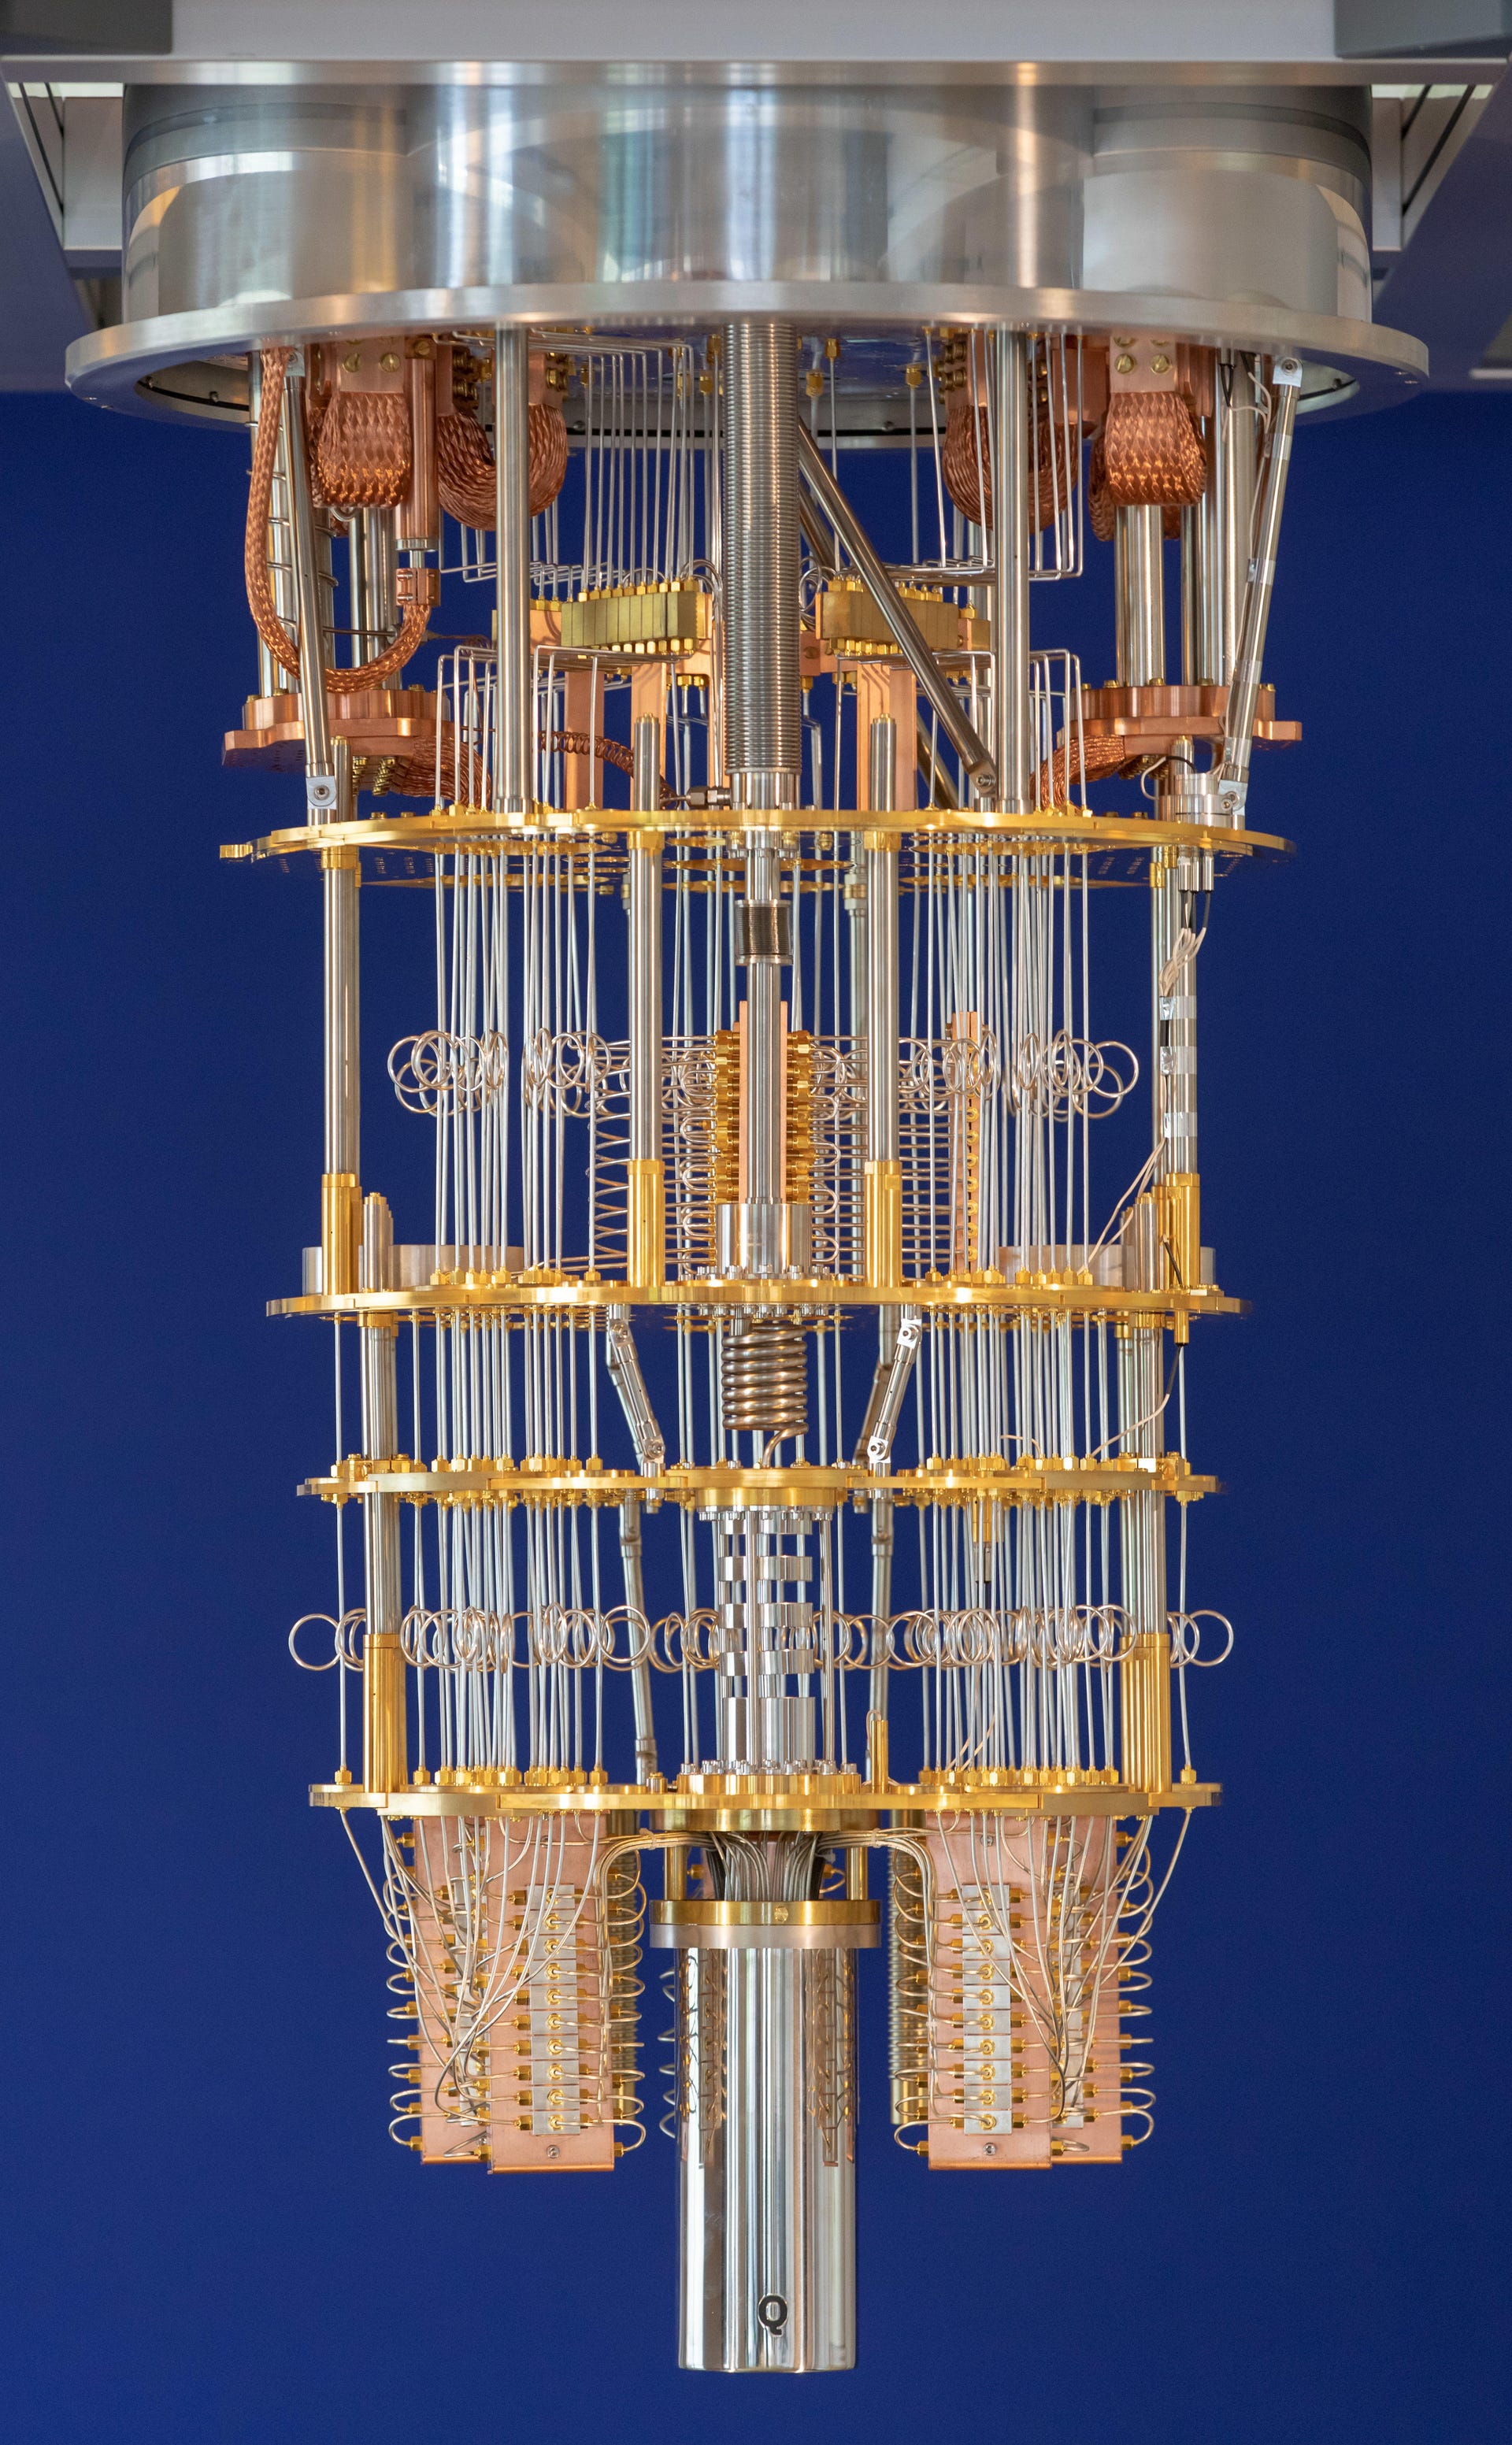 IBM's System Q quantum computer looks like no other computer you've ever seen. When running, it's hidden inside a chamber to chill it to a temperature colder than interstellar space.